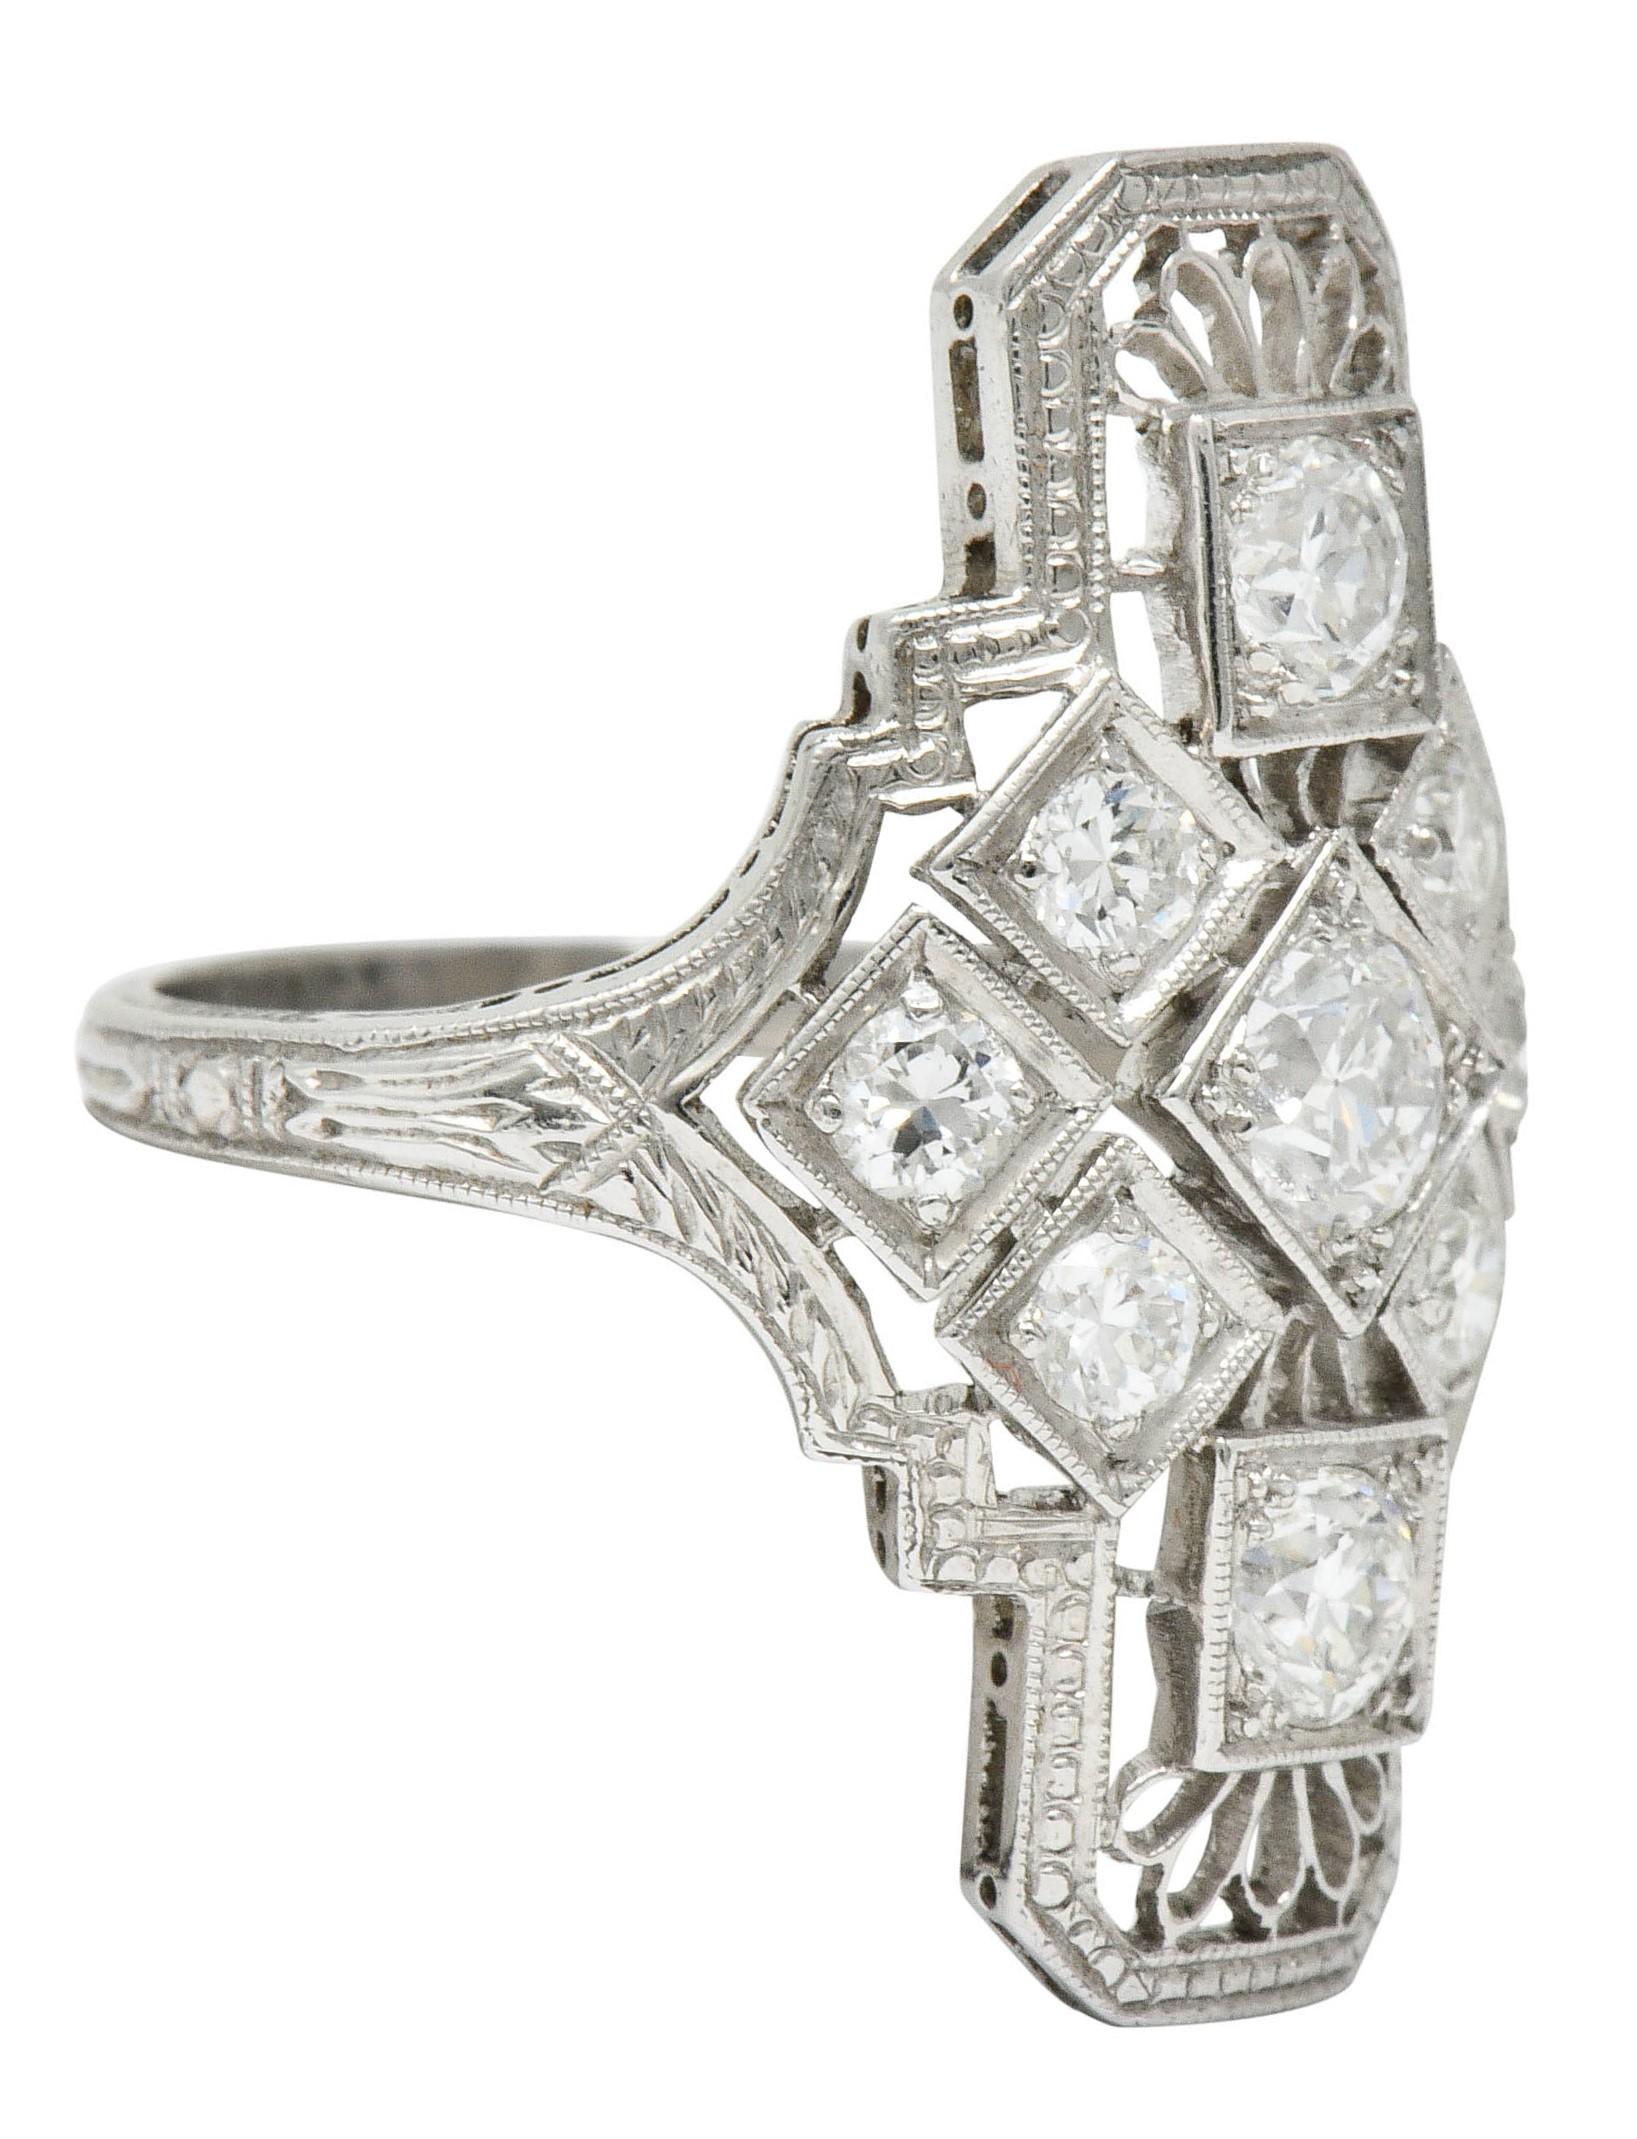 Dinner style ring with geometric forms and a pierced trellis design

Forms are tri-bead set with transitional cut diamonds with the center weighing approximately 0.27 carat

Additional diamonds weigh in total approximately 0.78 carat; all feature G